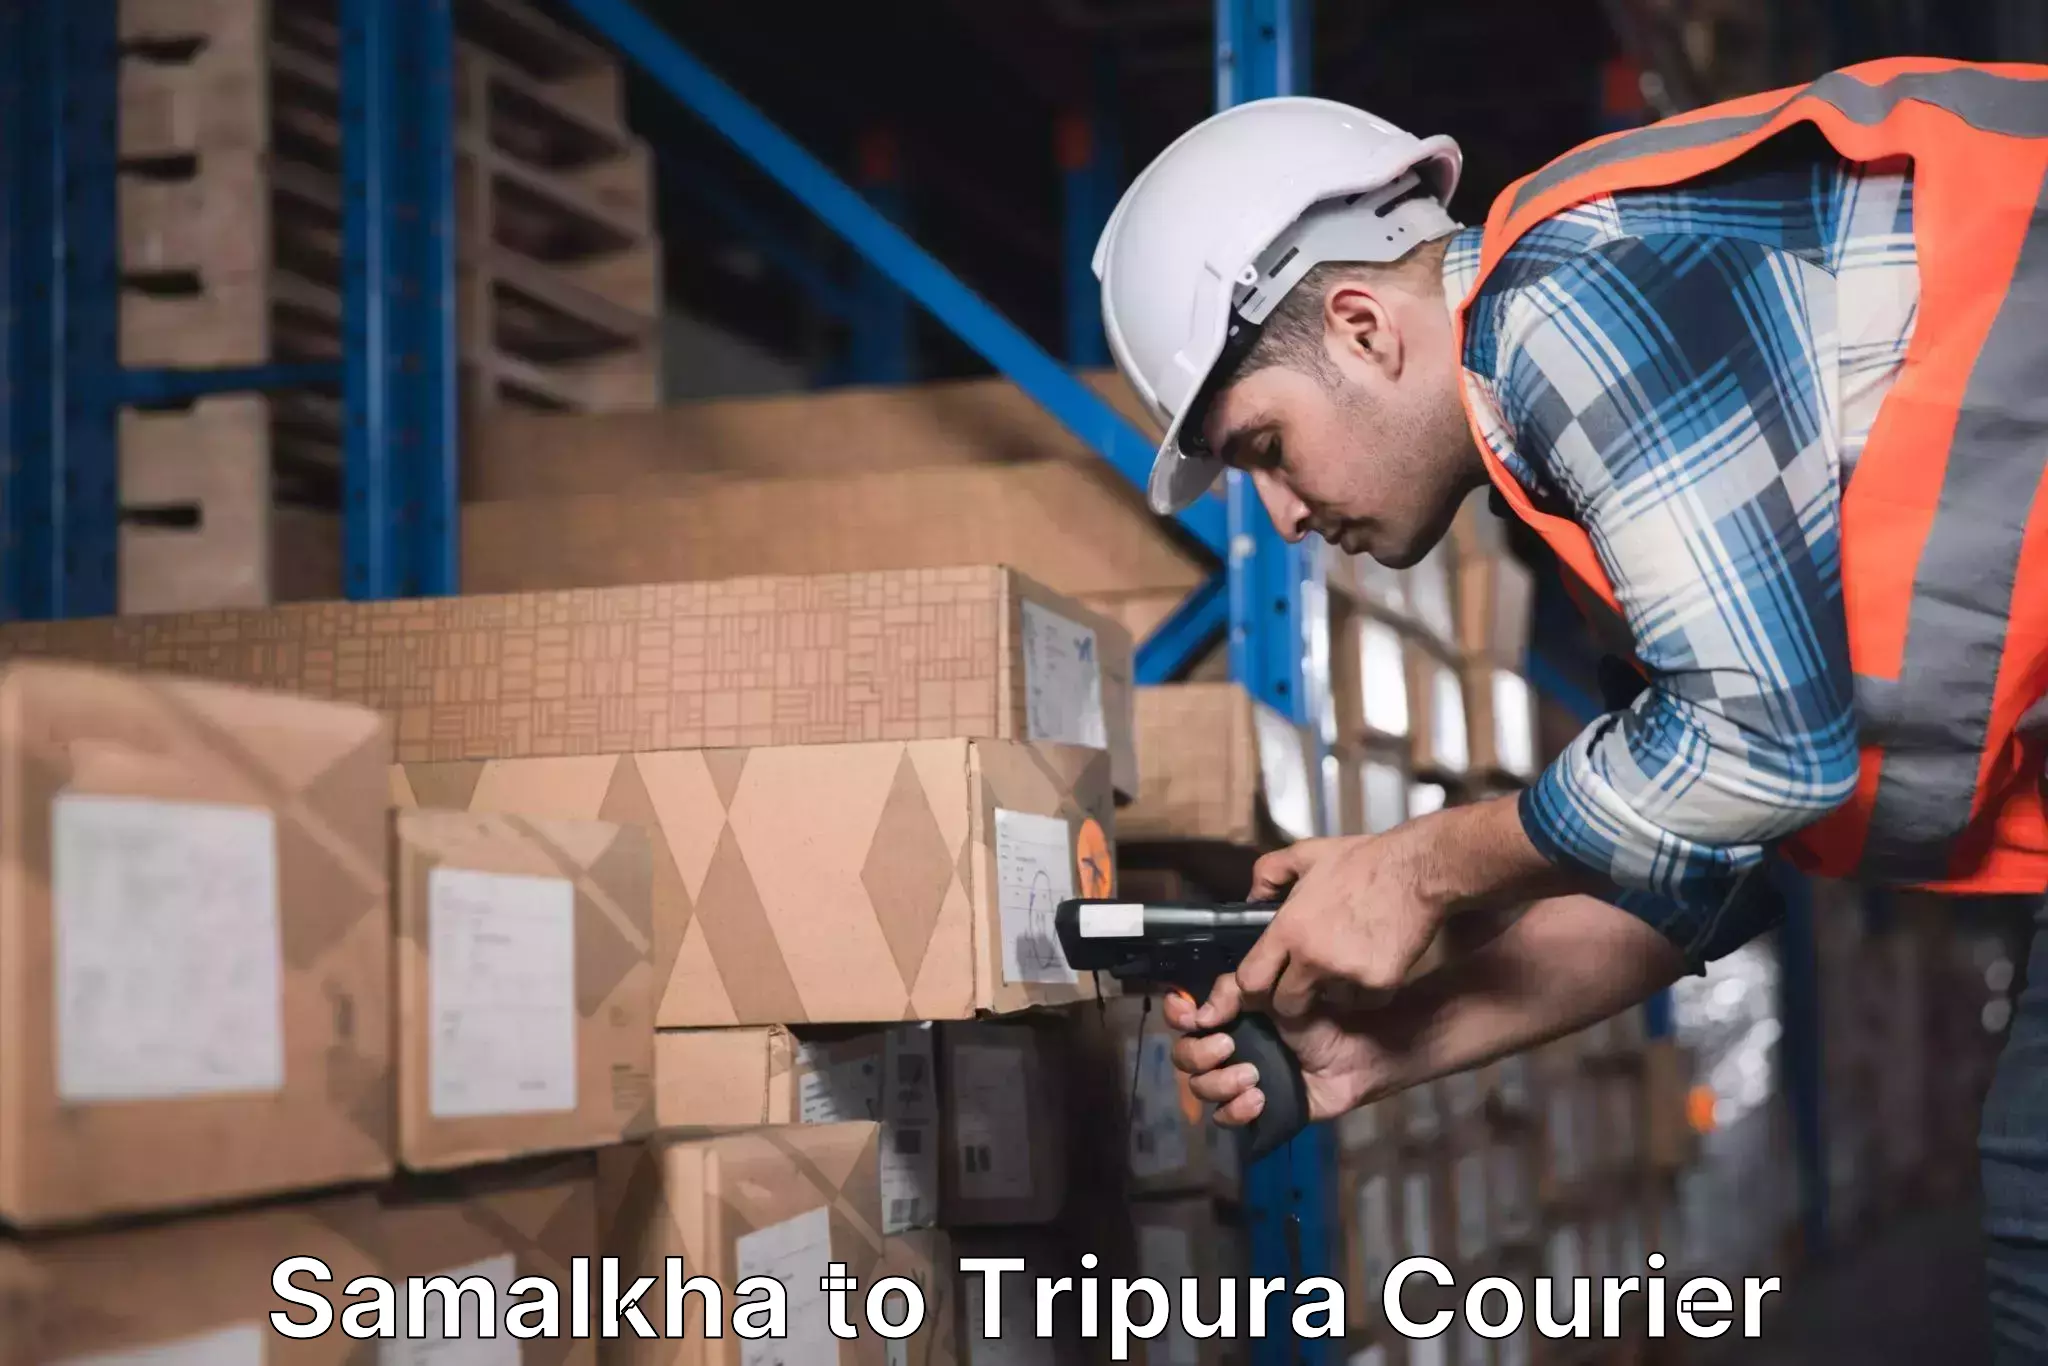 Customer-oriented courier services Samalkha to Udaipur Tripura